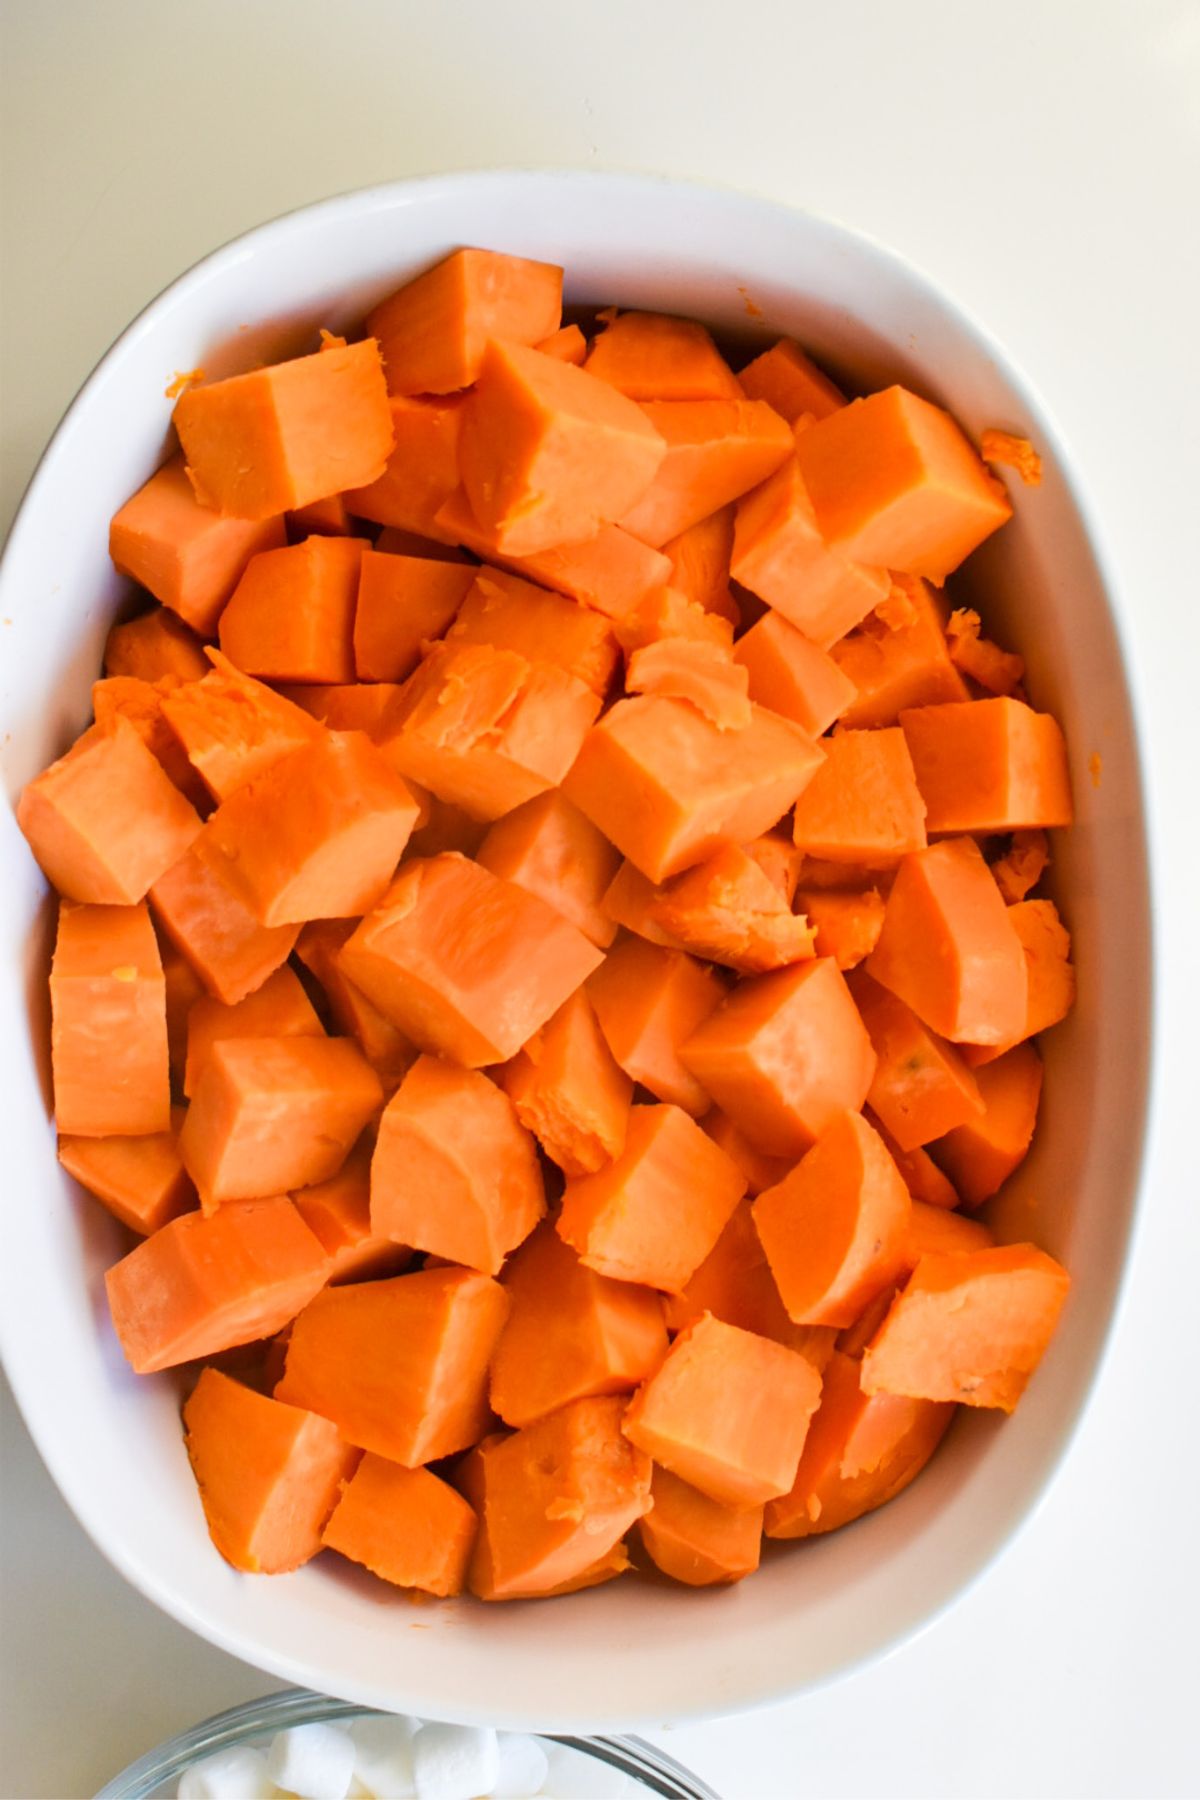 Cubed sweet potatoes in a white casserole dish.